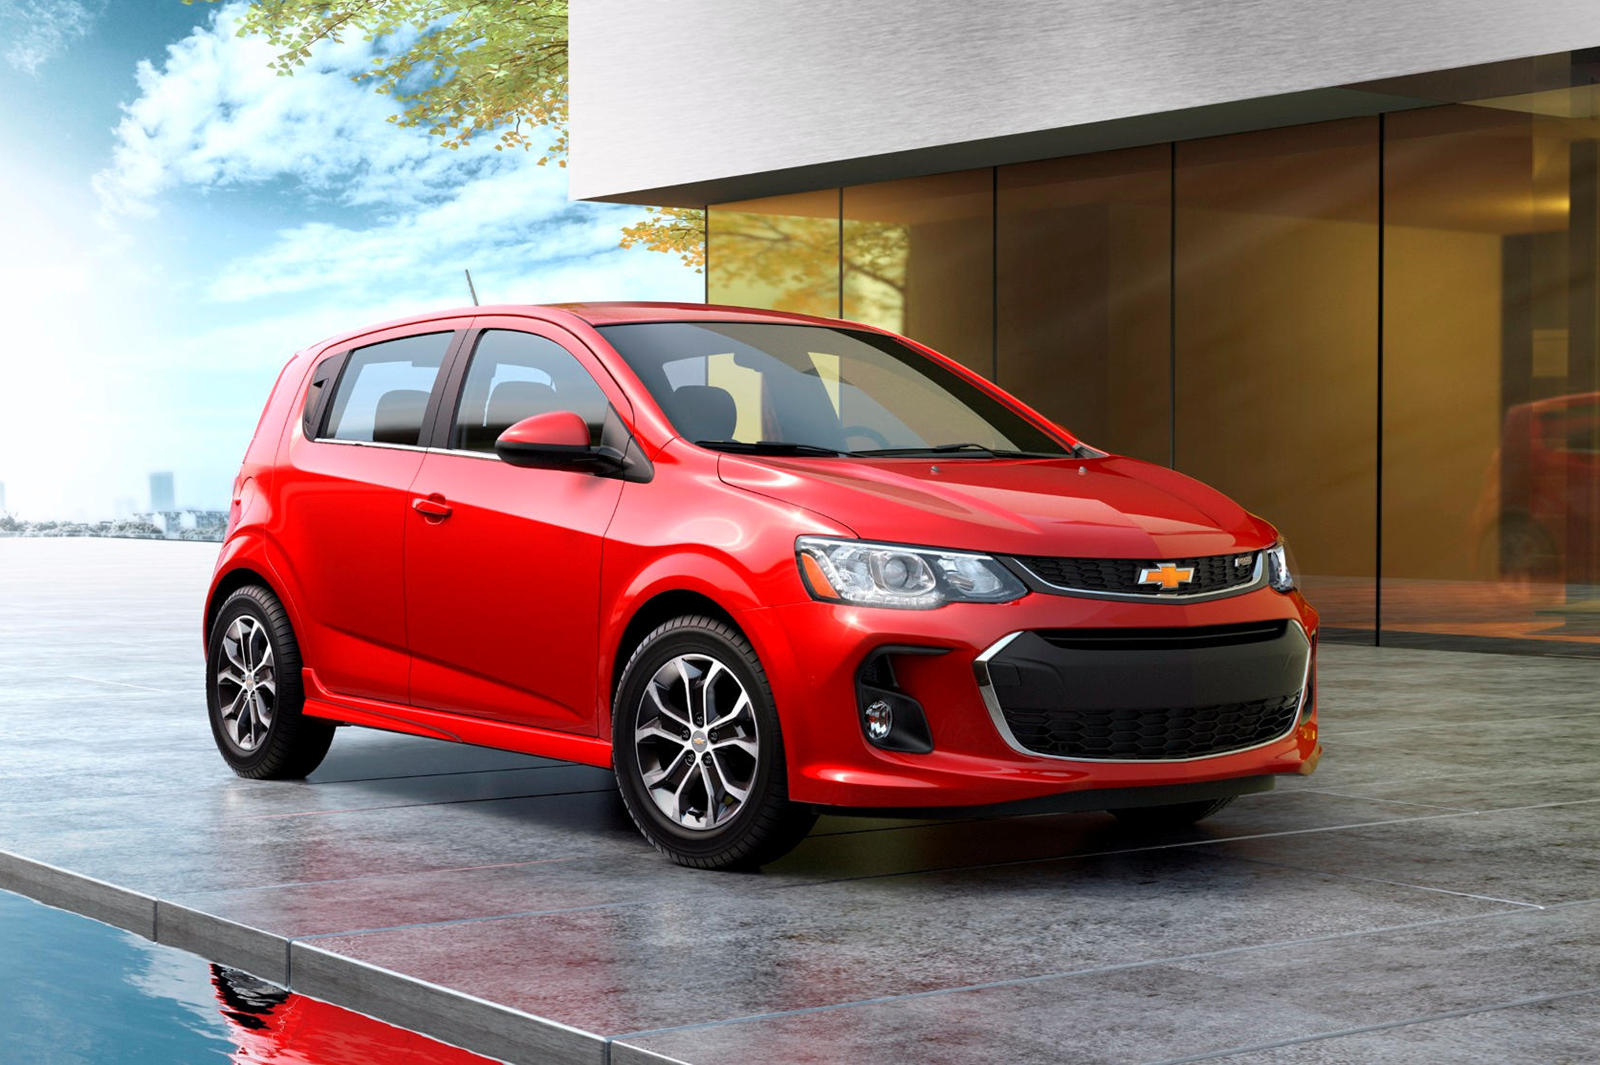 2020 Chevrolet Sonic Hatchback Front Angle View